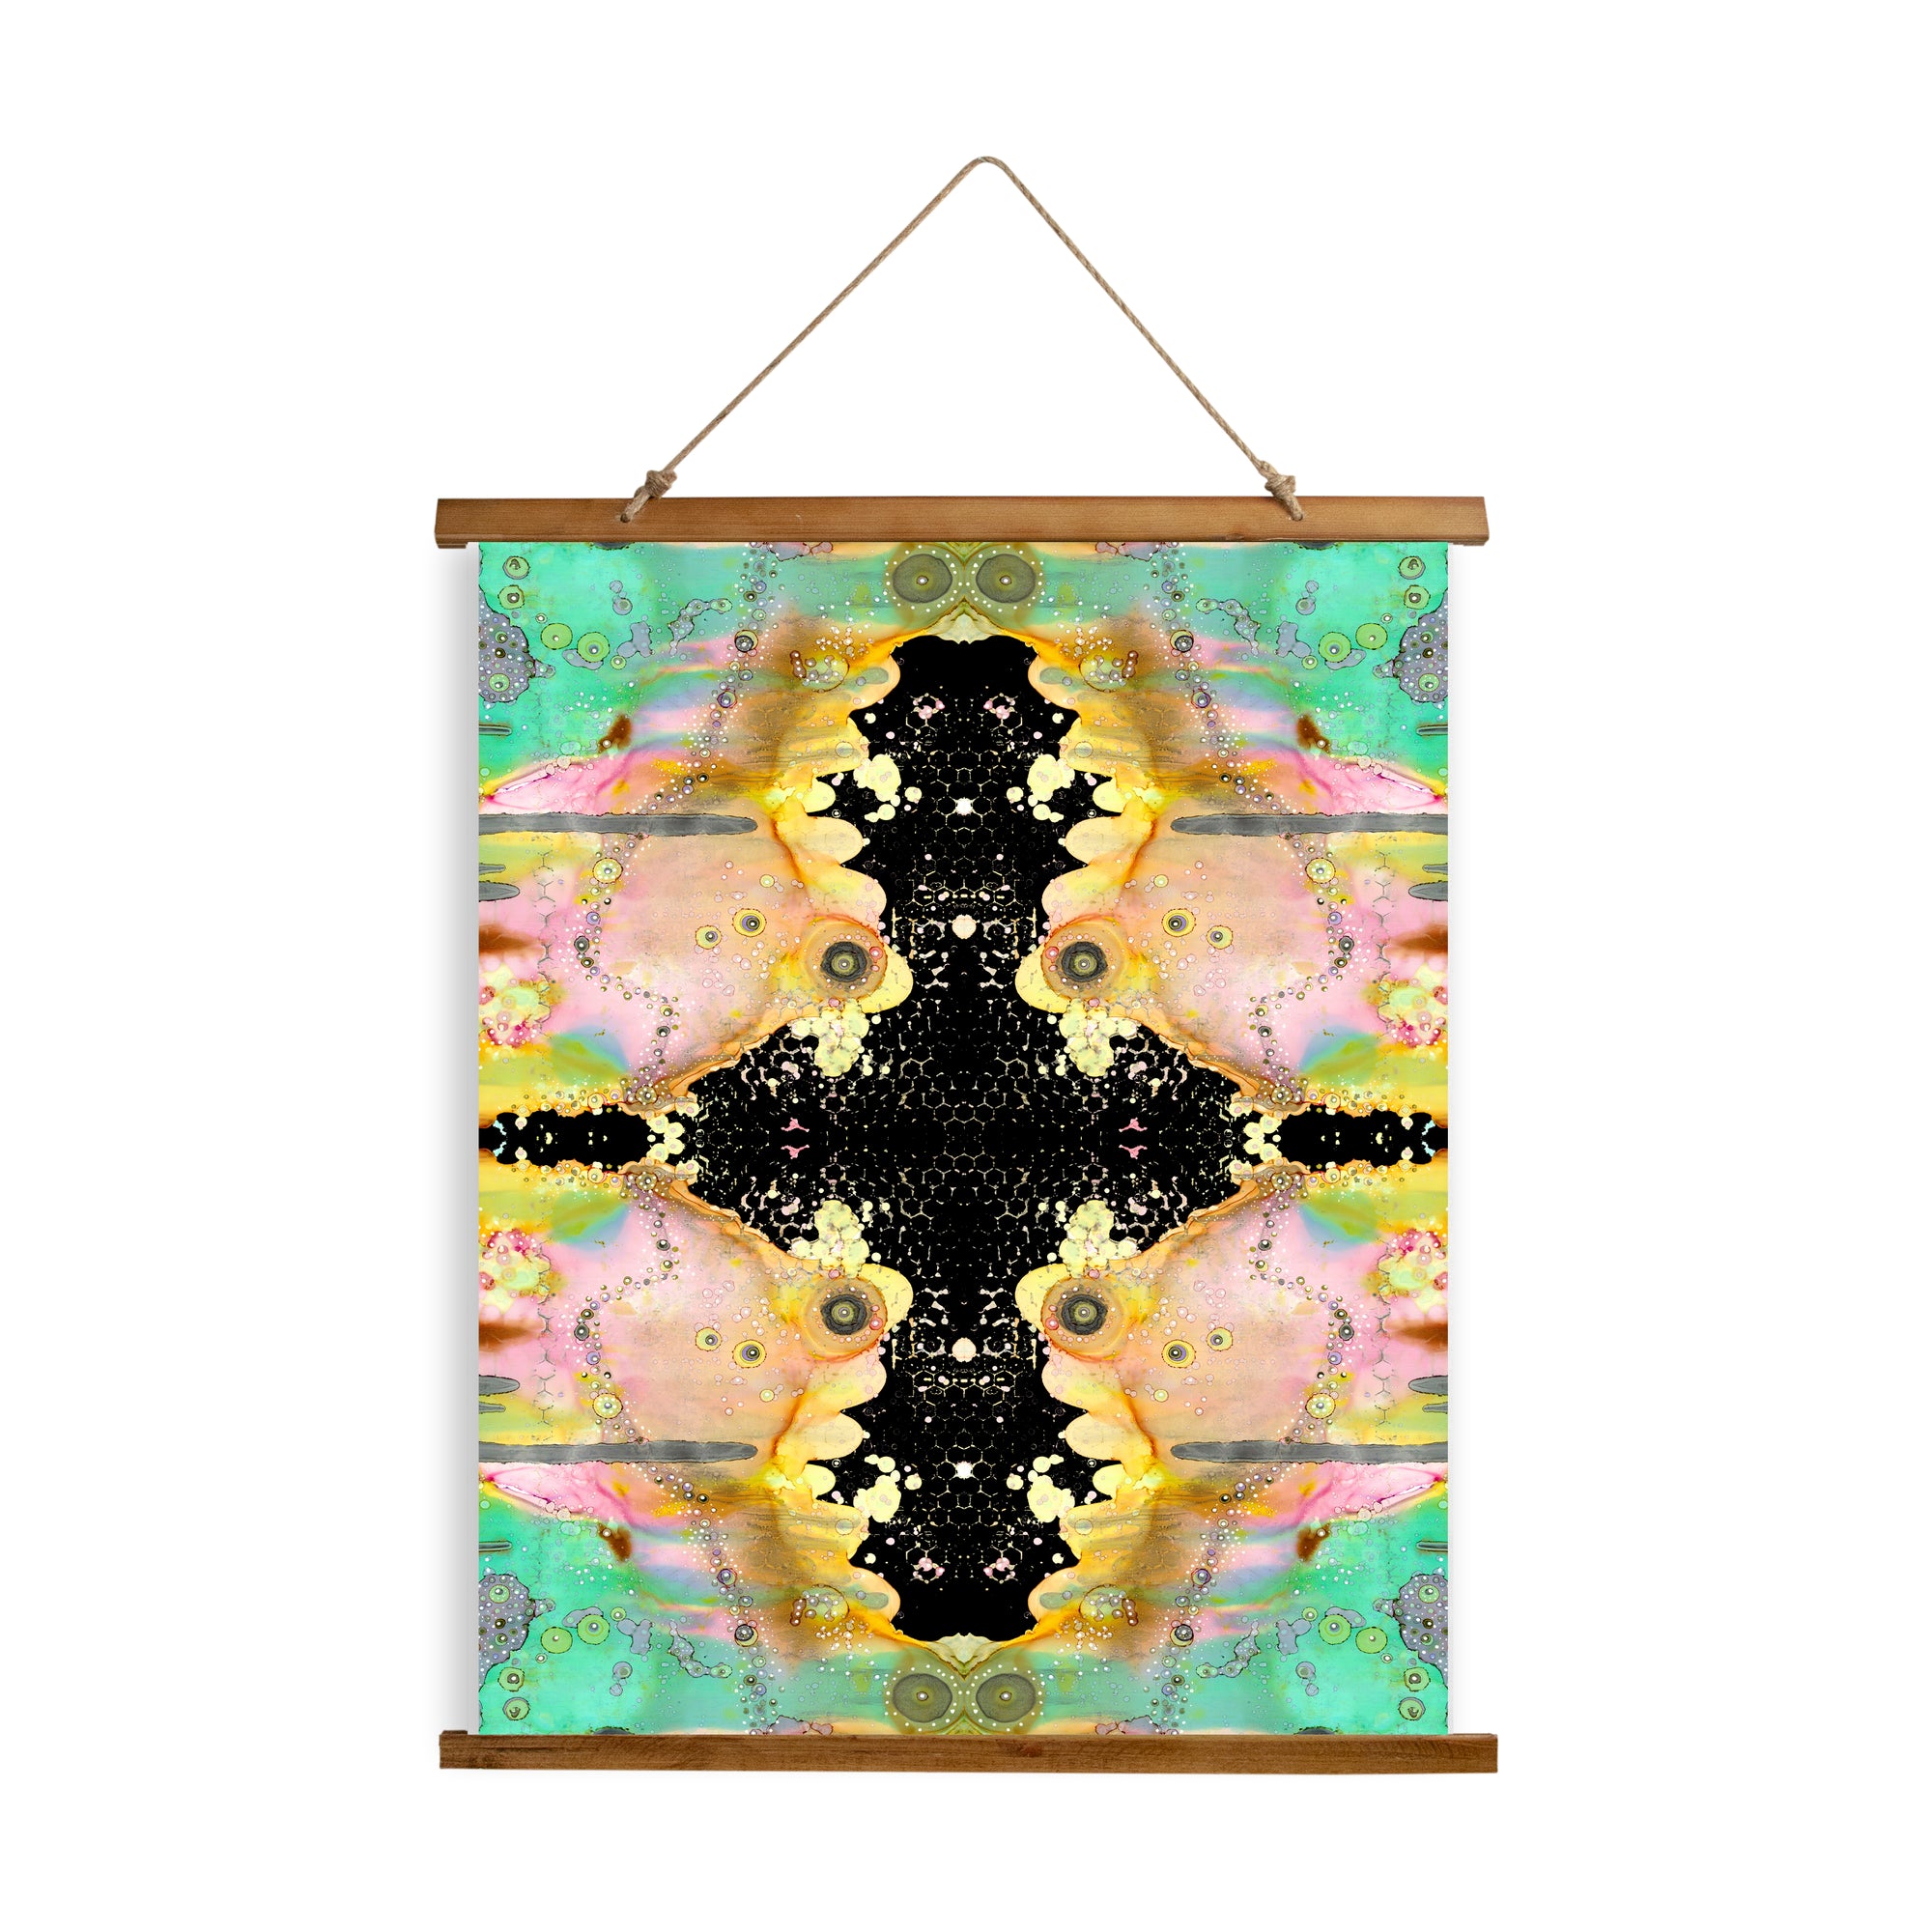 Whimsical Wood Slat Tapestry "Over The Rainbow 2"